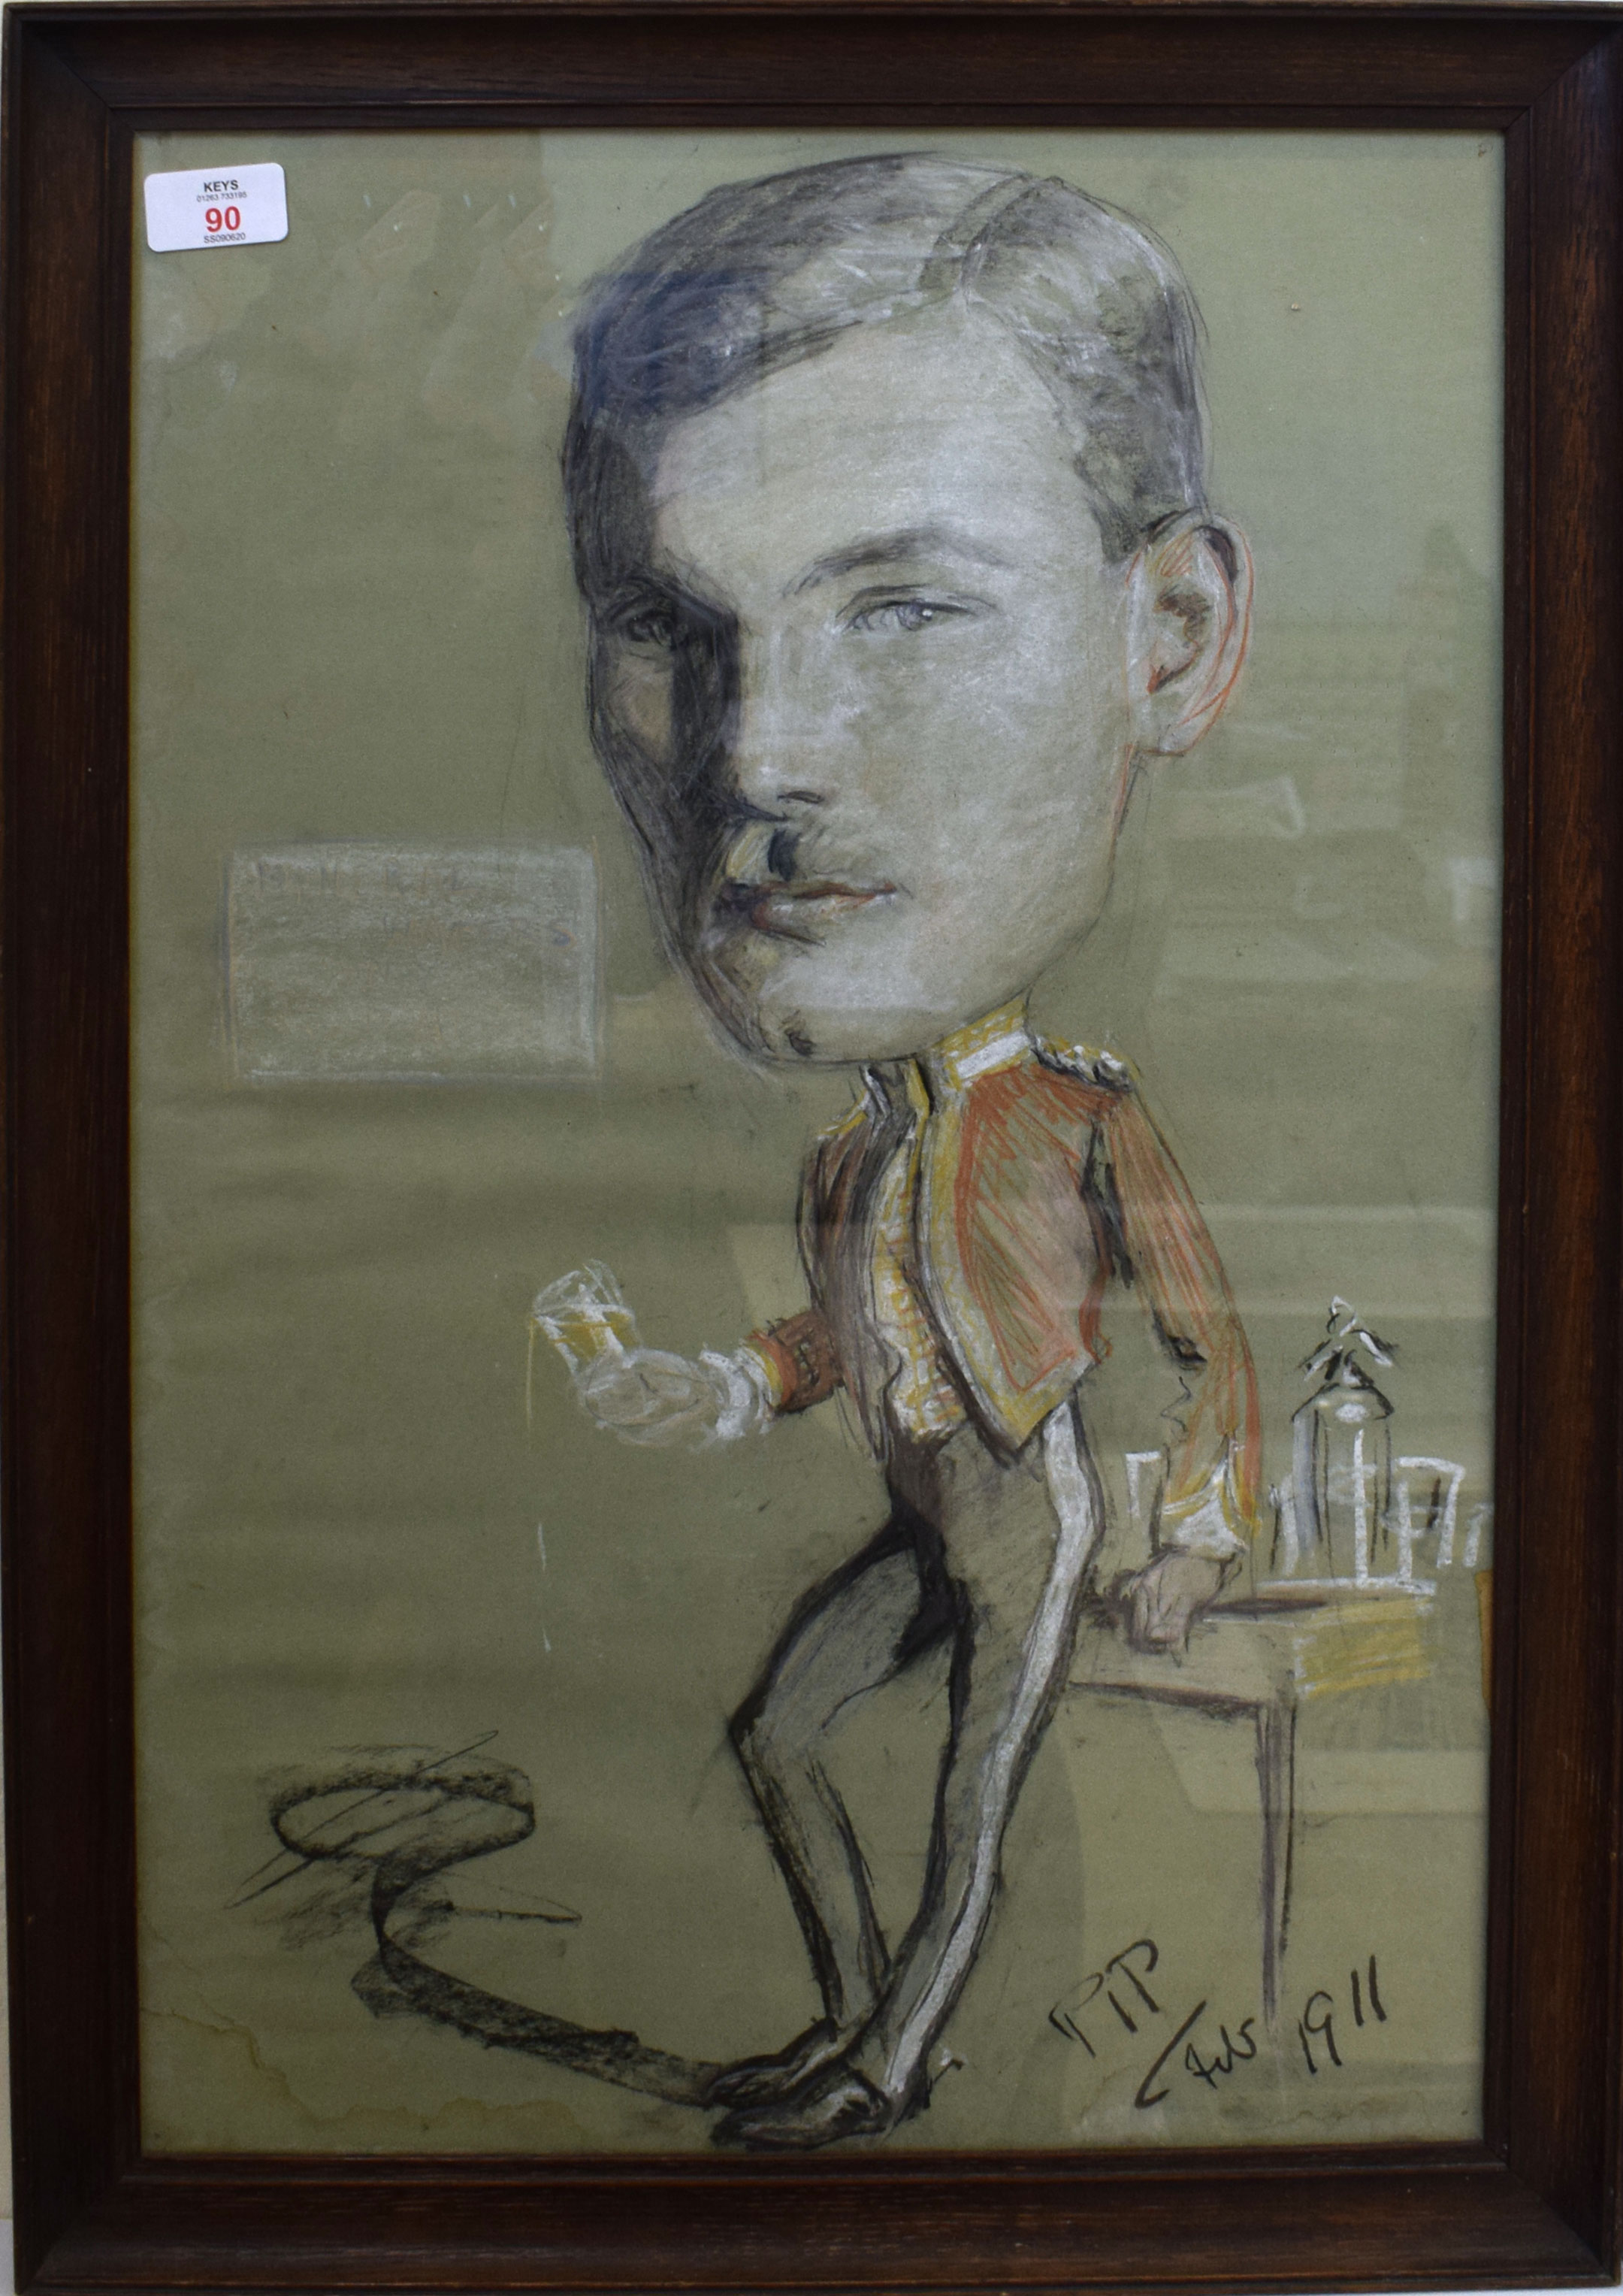 Pip (early 20th century), caricature, charcoal and watercolour, signed and dated 1911 lower right,